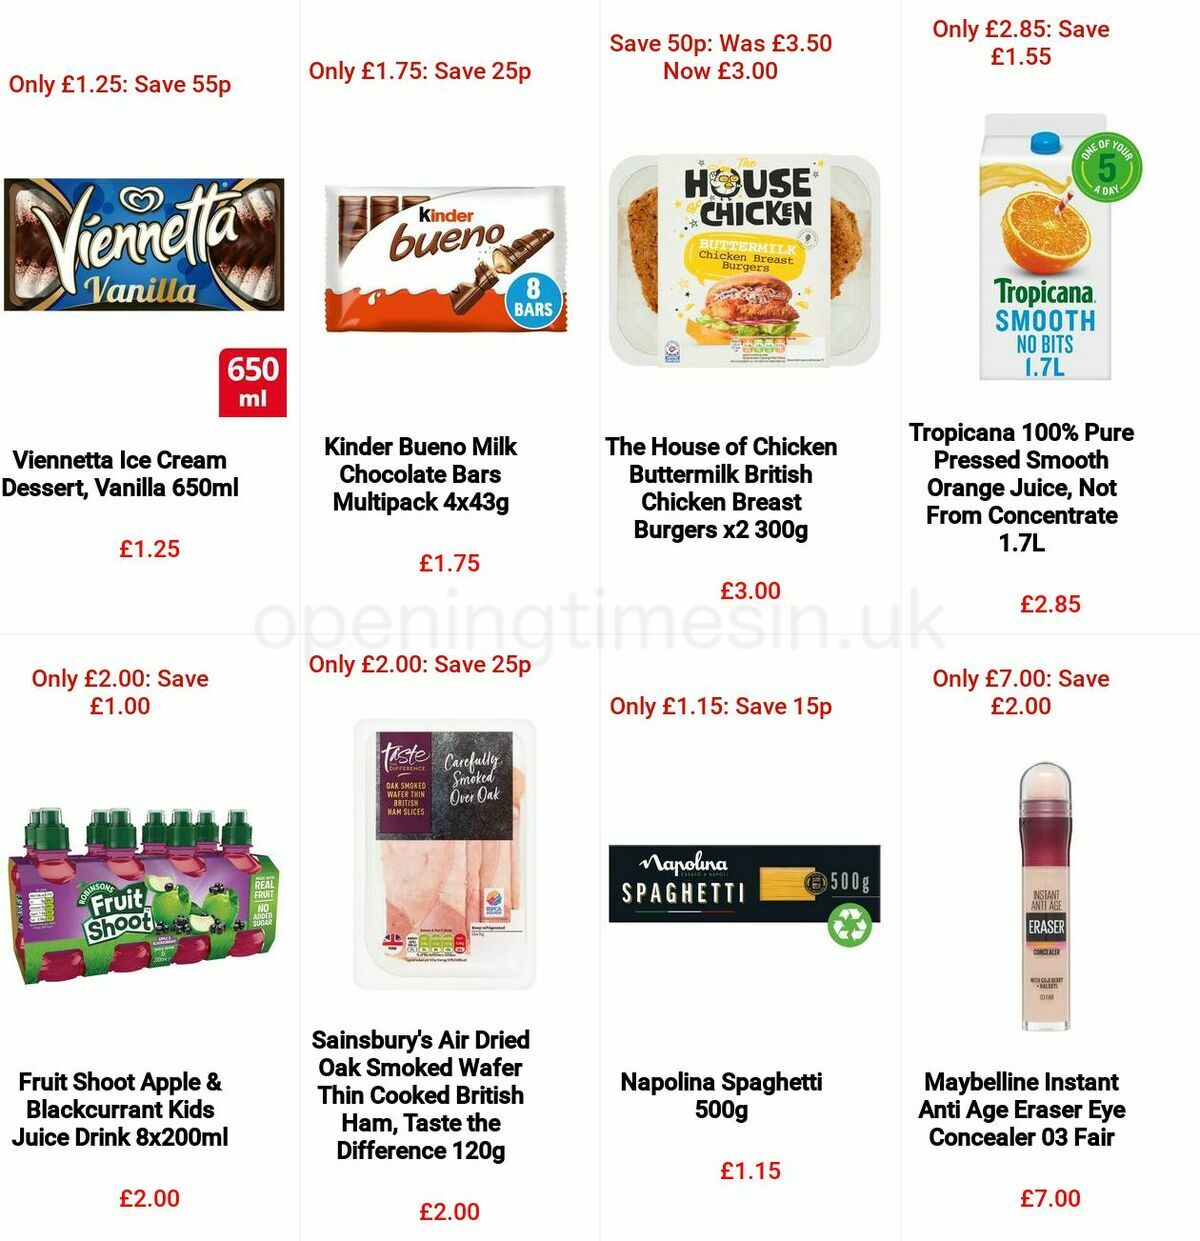 Sainsbury's Offers from 1 April